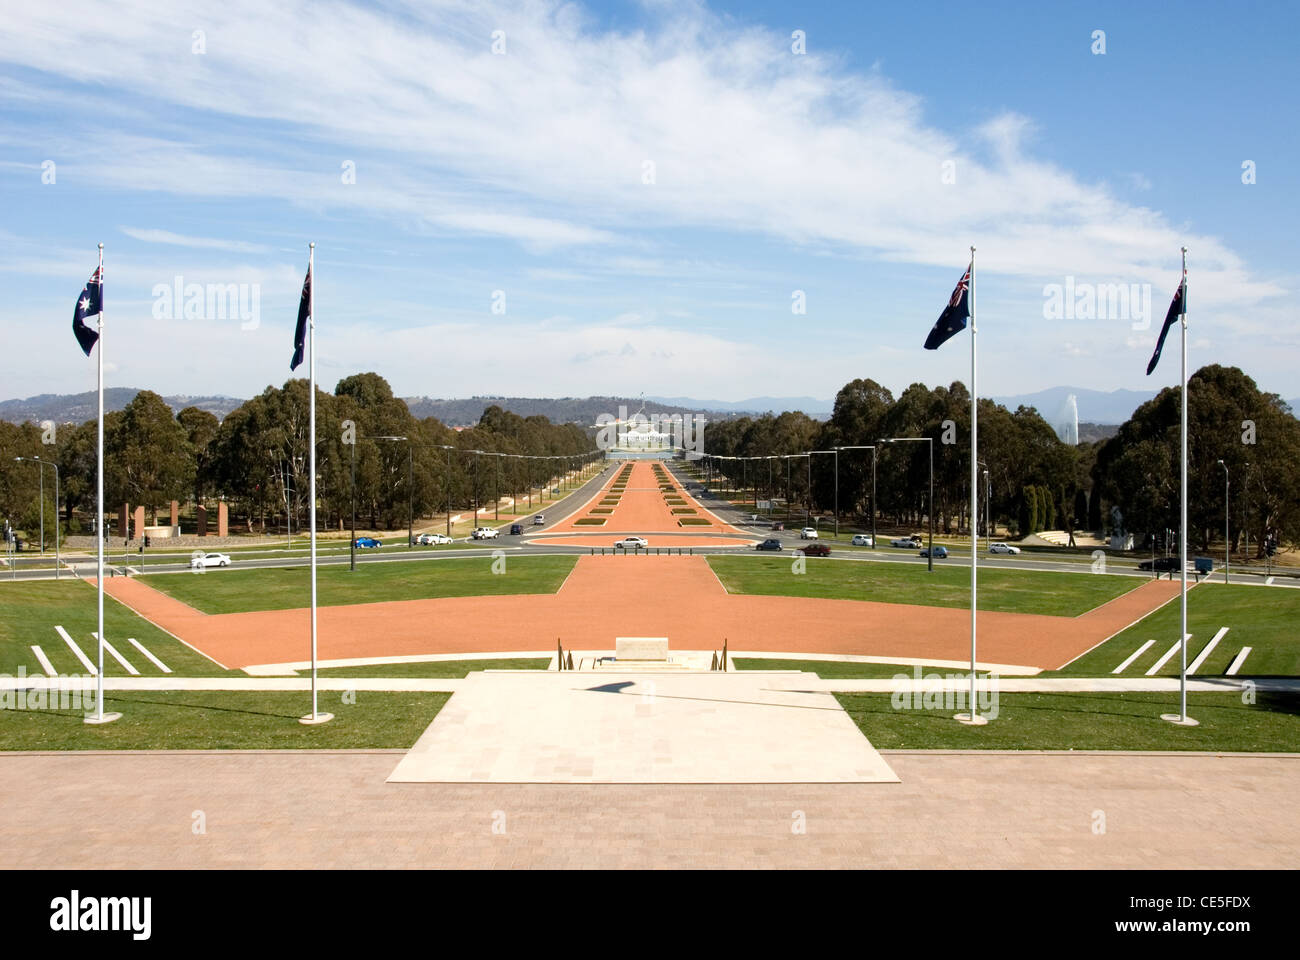 The scene of Anzac Avenue, with Old Parliament House in the distance, Canberra, Australian Capital Territory, Australia Stock Photo